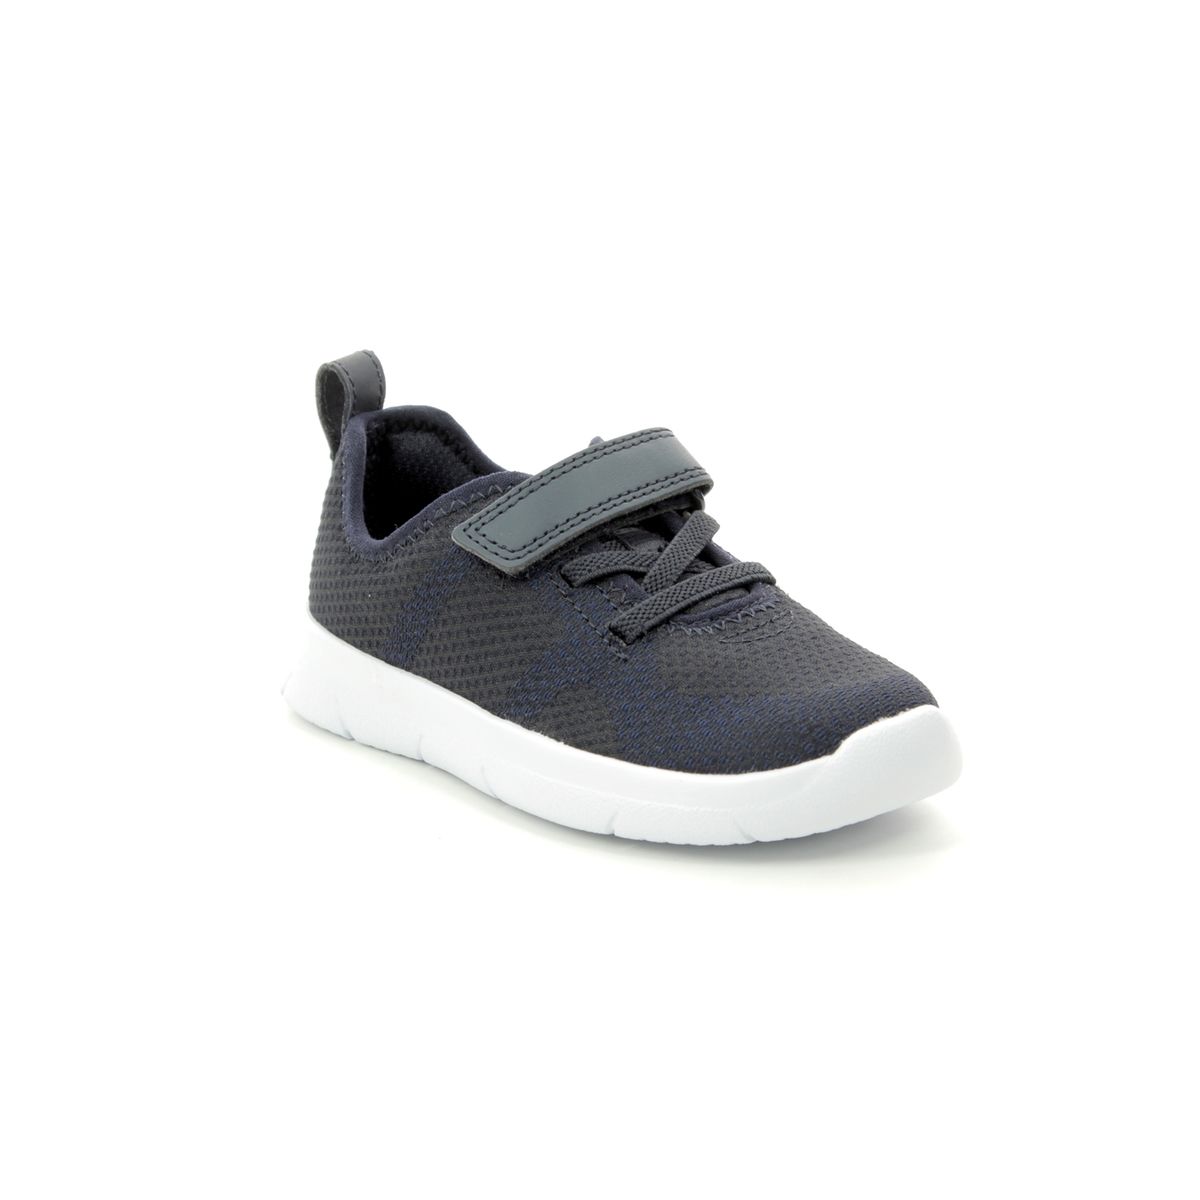 Clarks Ath Flux T Navy Kids Toddler Boys Trainers 412697G In Size 9.5 In Plain Navy G Width Fitting For kids